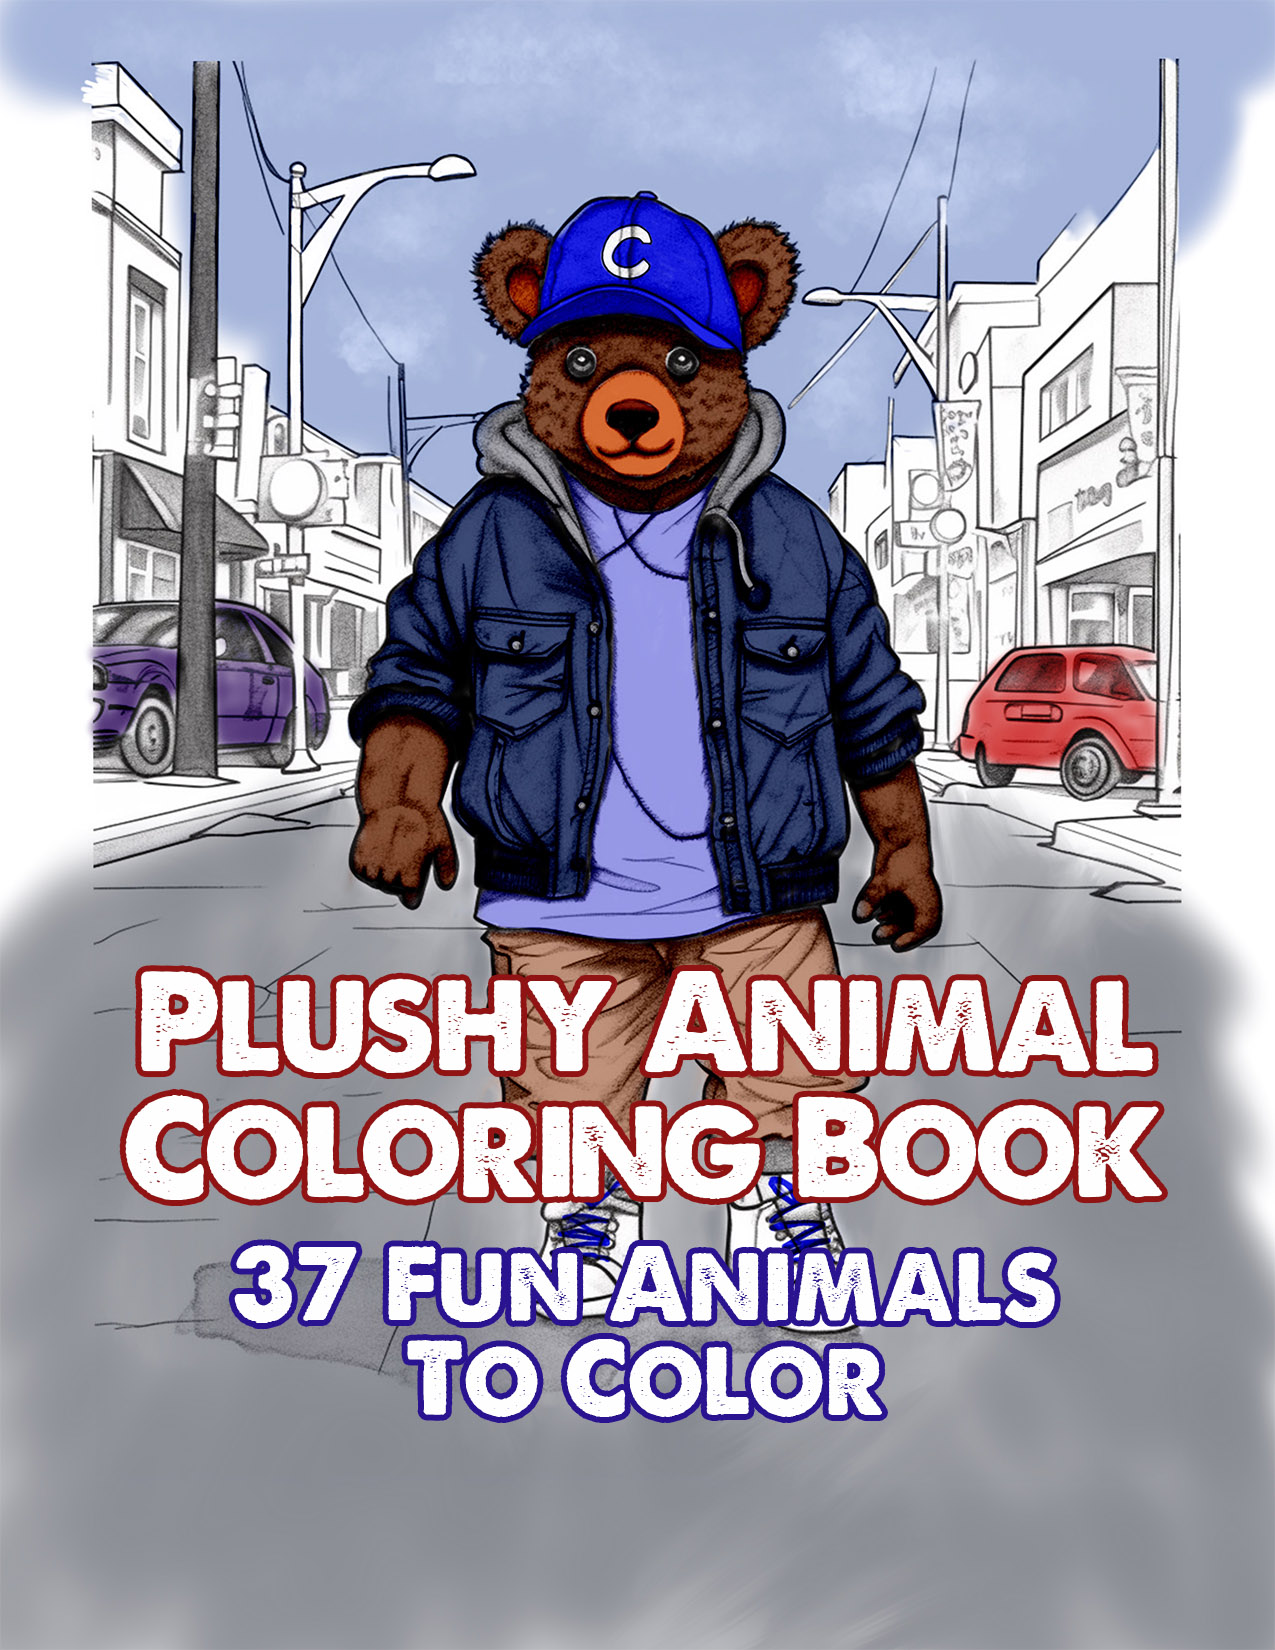 Plushy Animal Coloring Book Cover